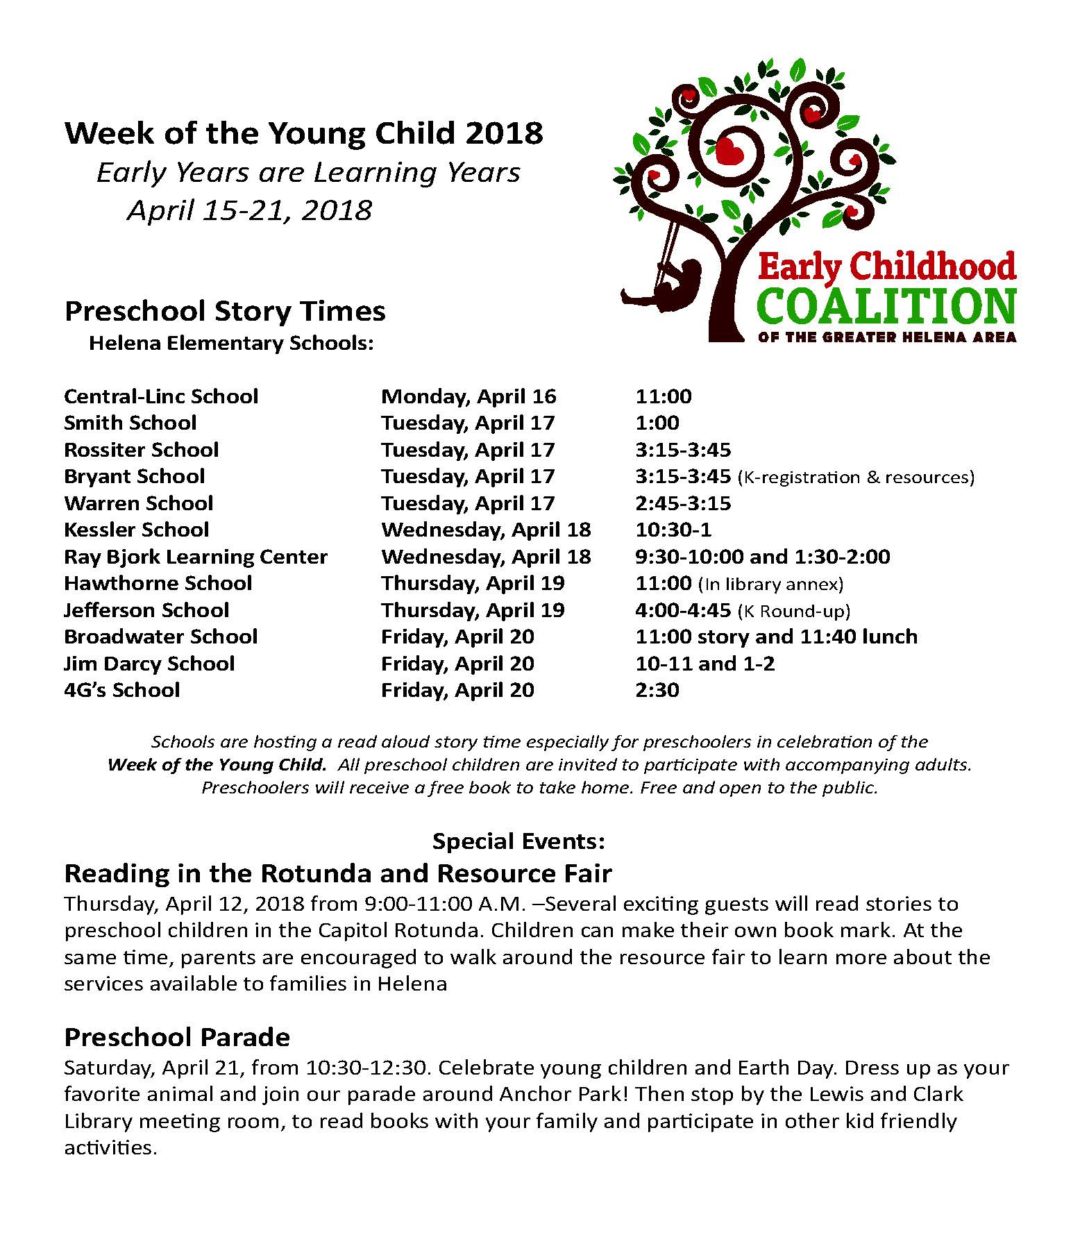 Week of the Young Child 2018 - Check out these Special Events!